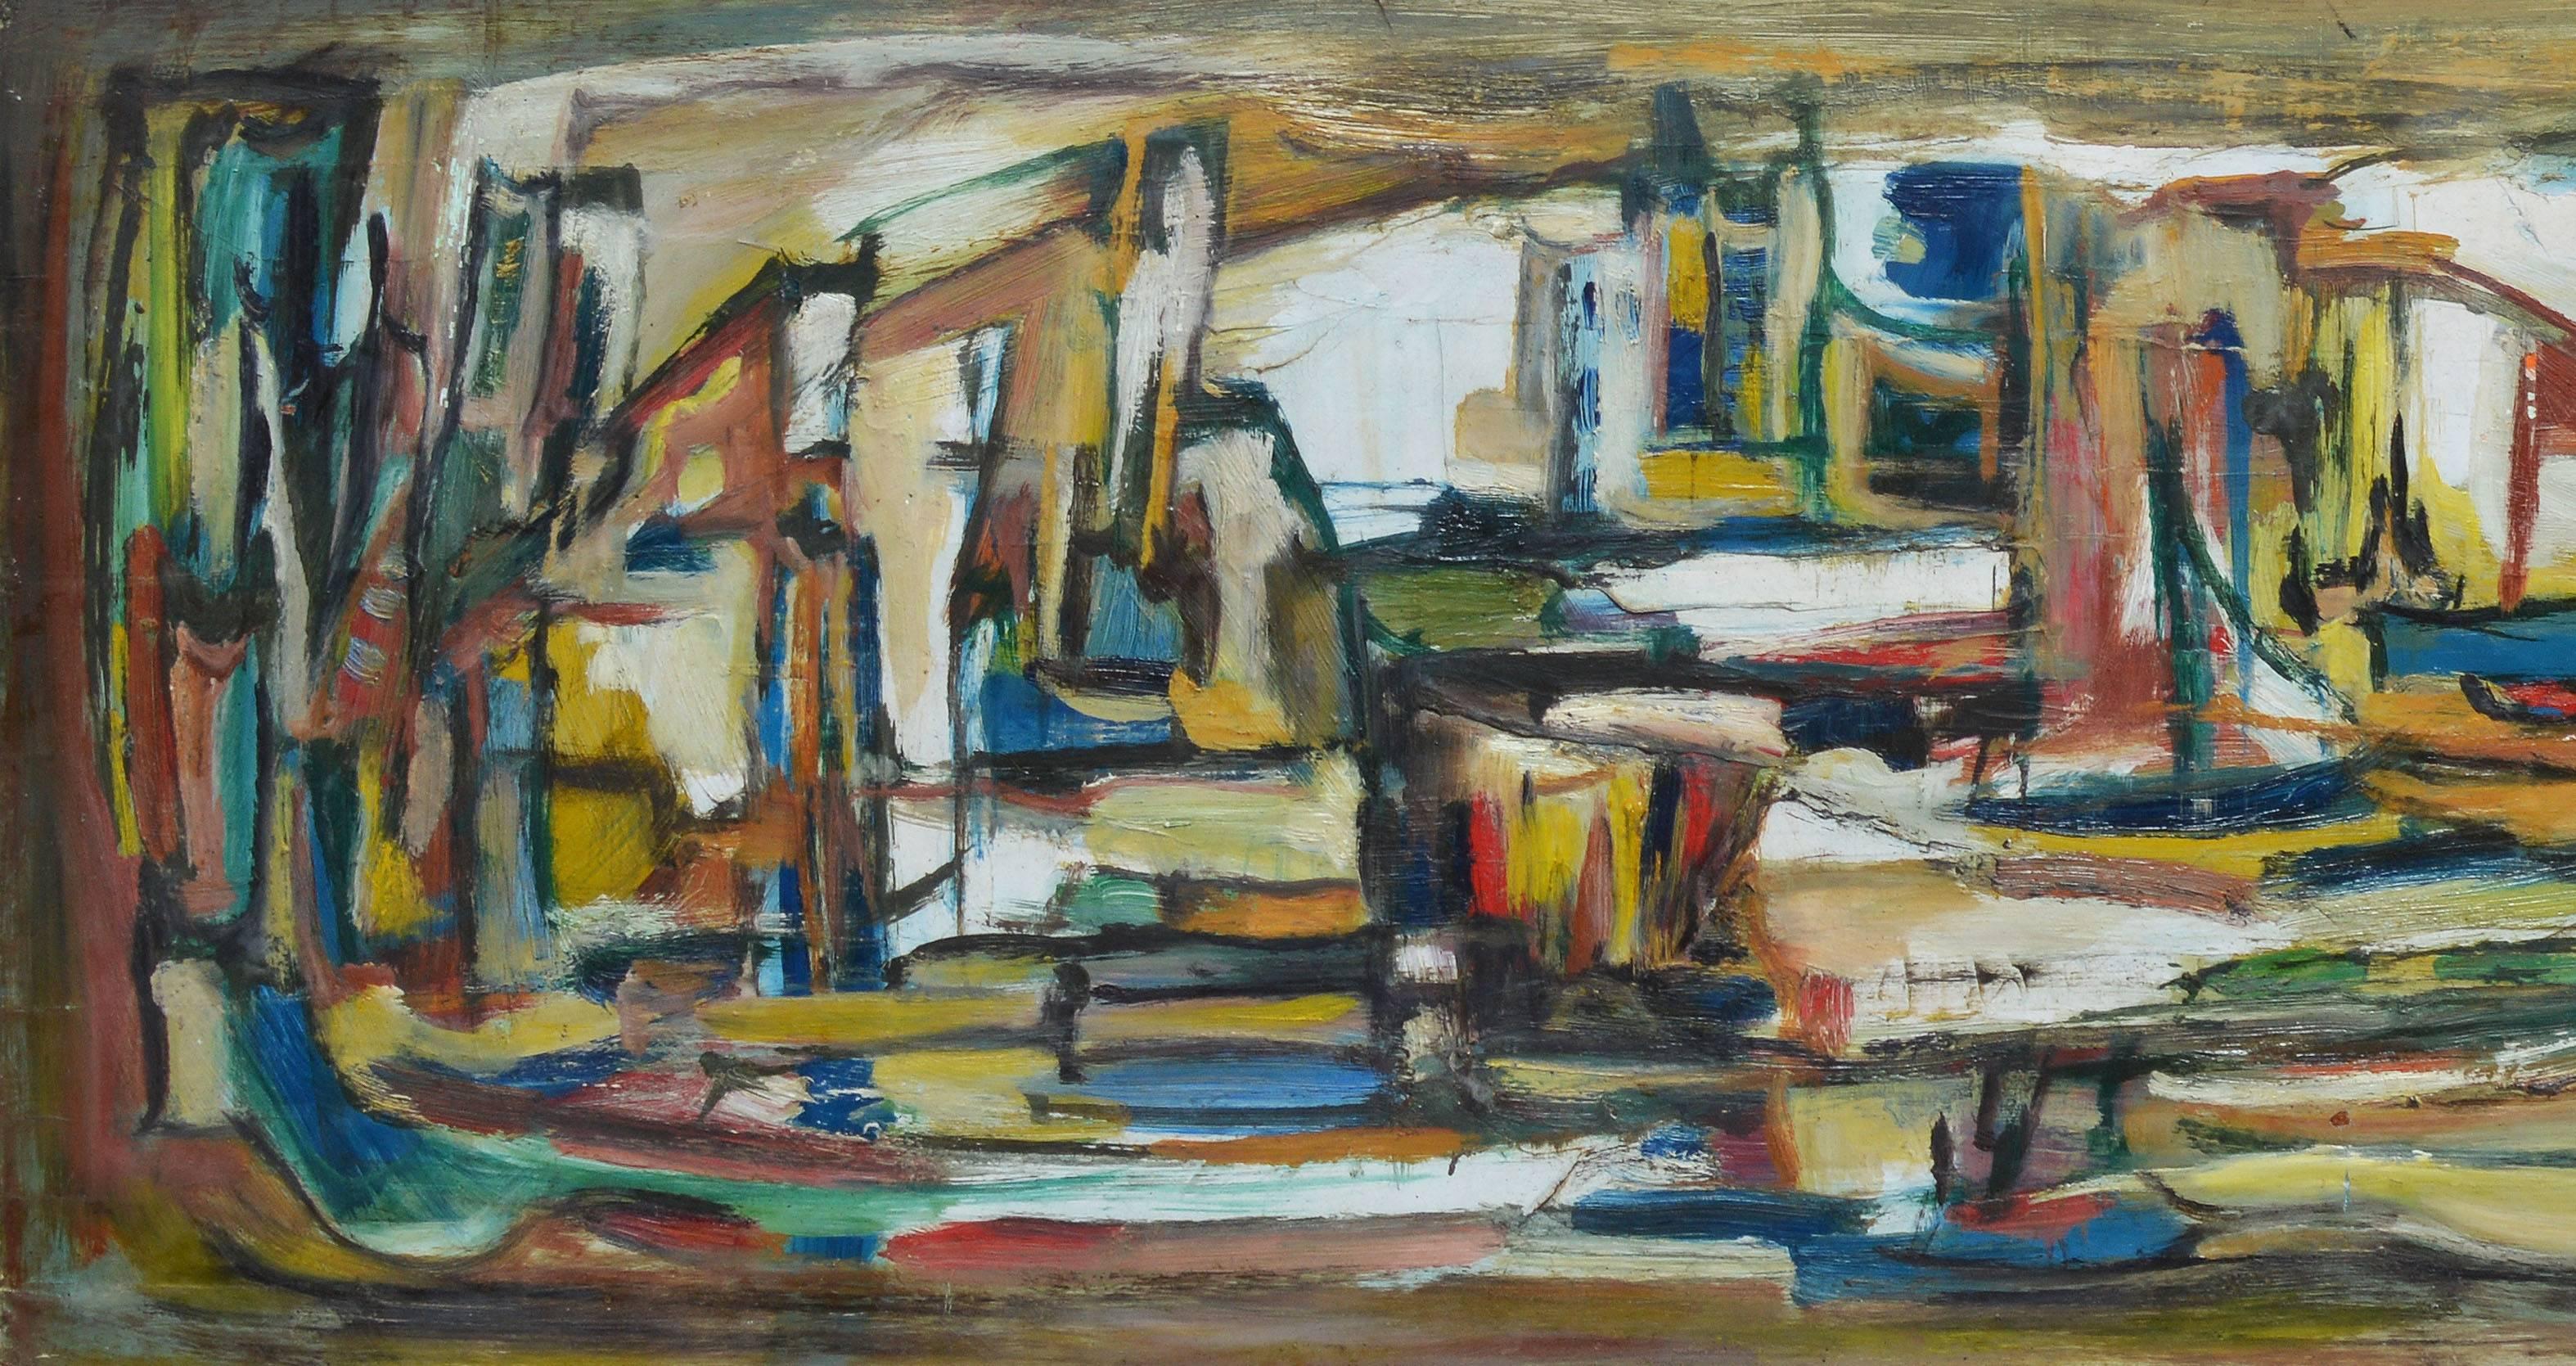 Modernist painting of a city.  Oil on board, circa 1962.  Signed illegibly lower right.  Displayed in a modernist frame.  Image size, 24"L x 10"H, overall 28.5"L x 14.5"H.